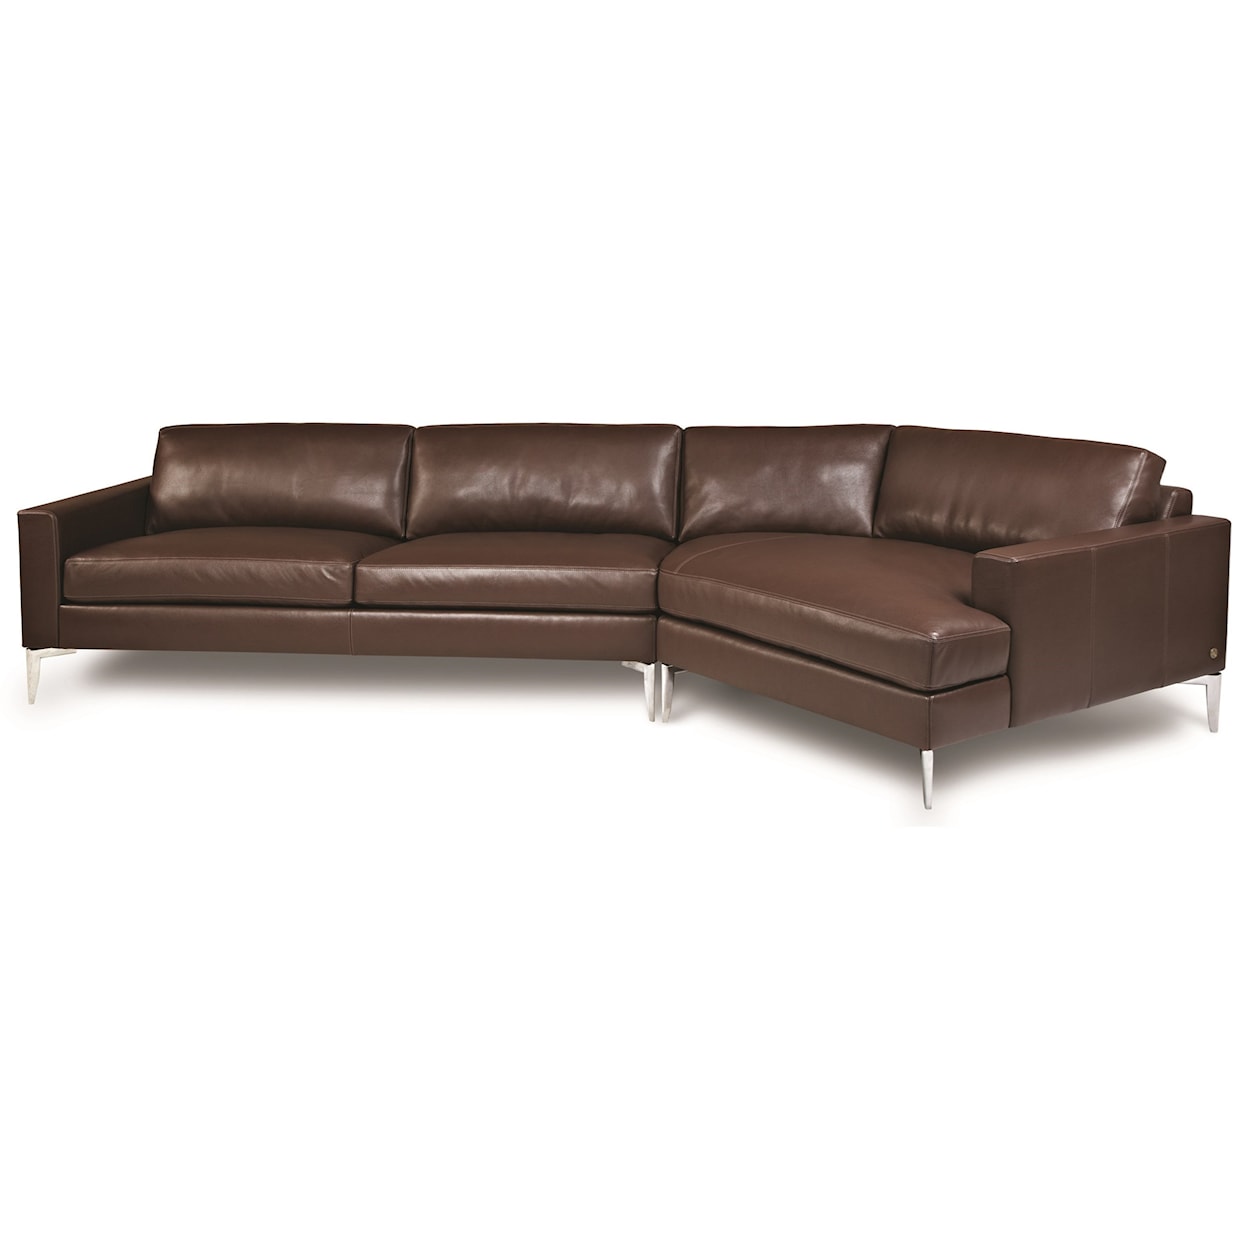 American Leather Oliver 3-Seat Sectional Sofa w/ LAS Cuddler